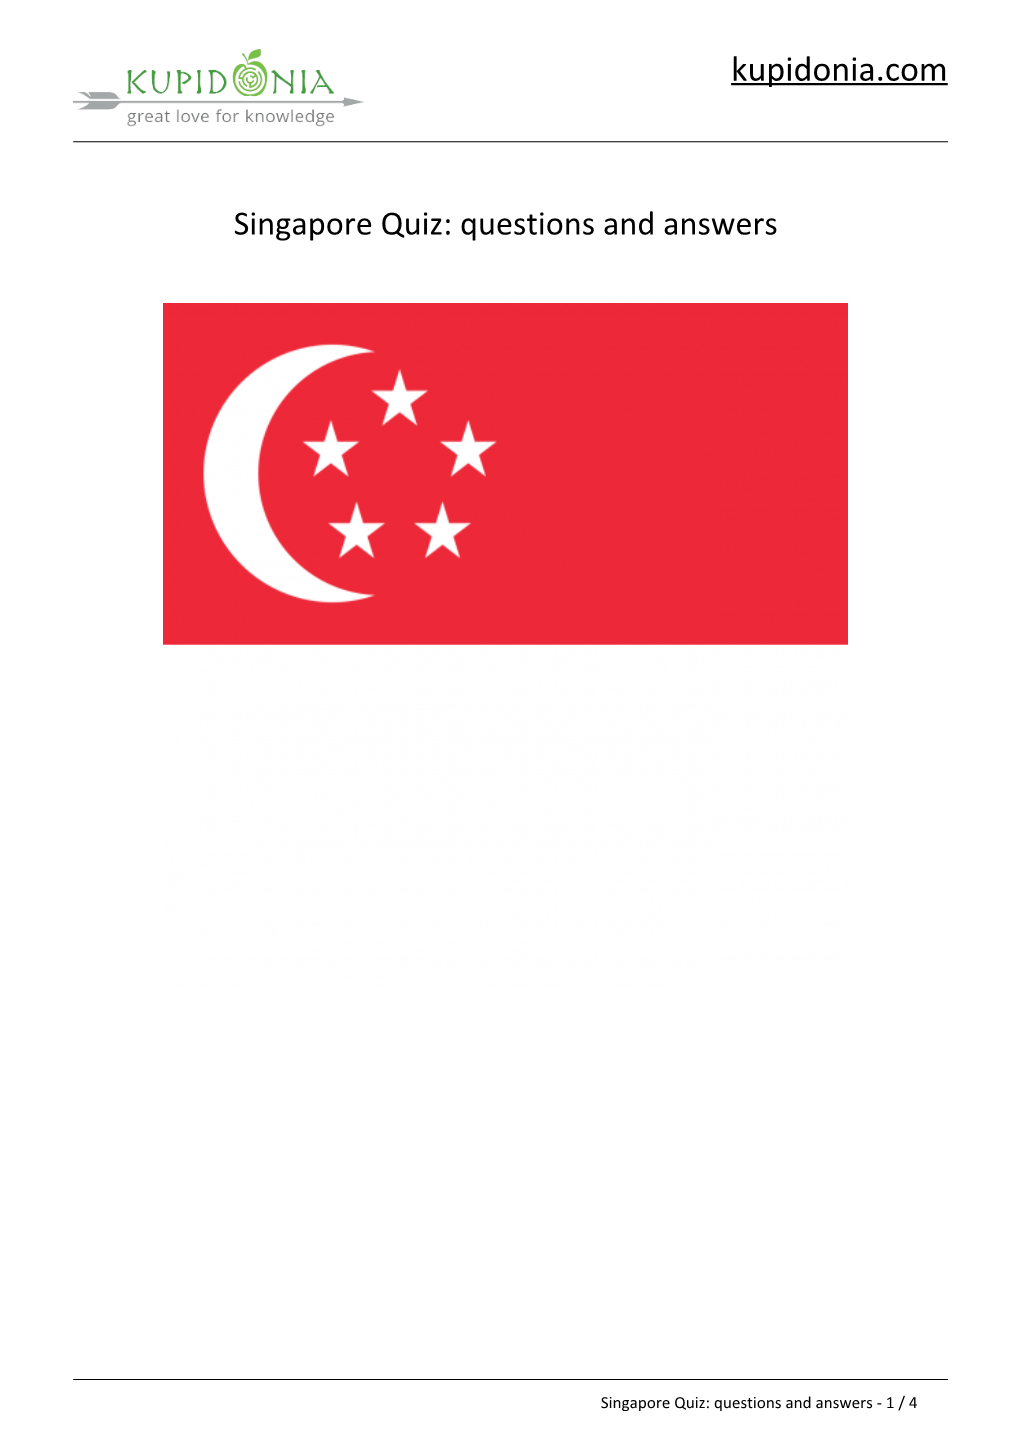 Singapore Quiz: Questions and Answers